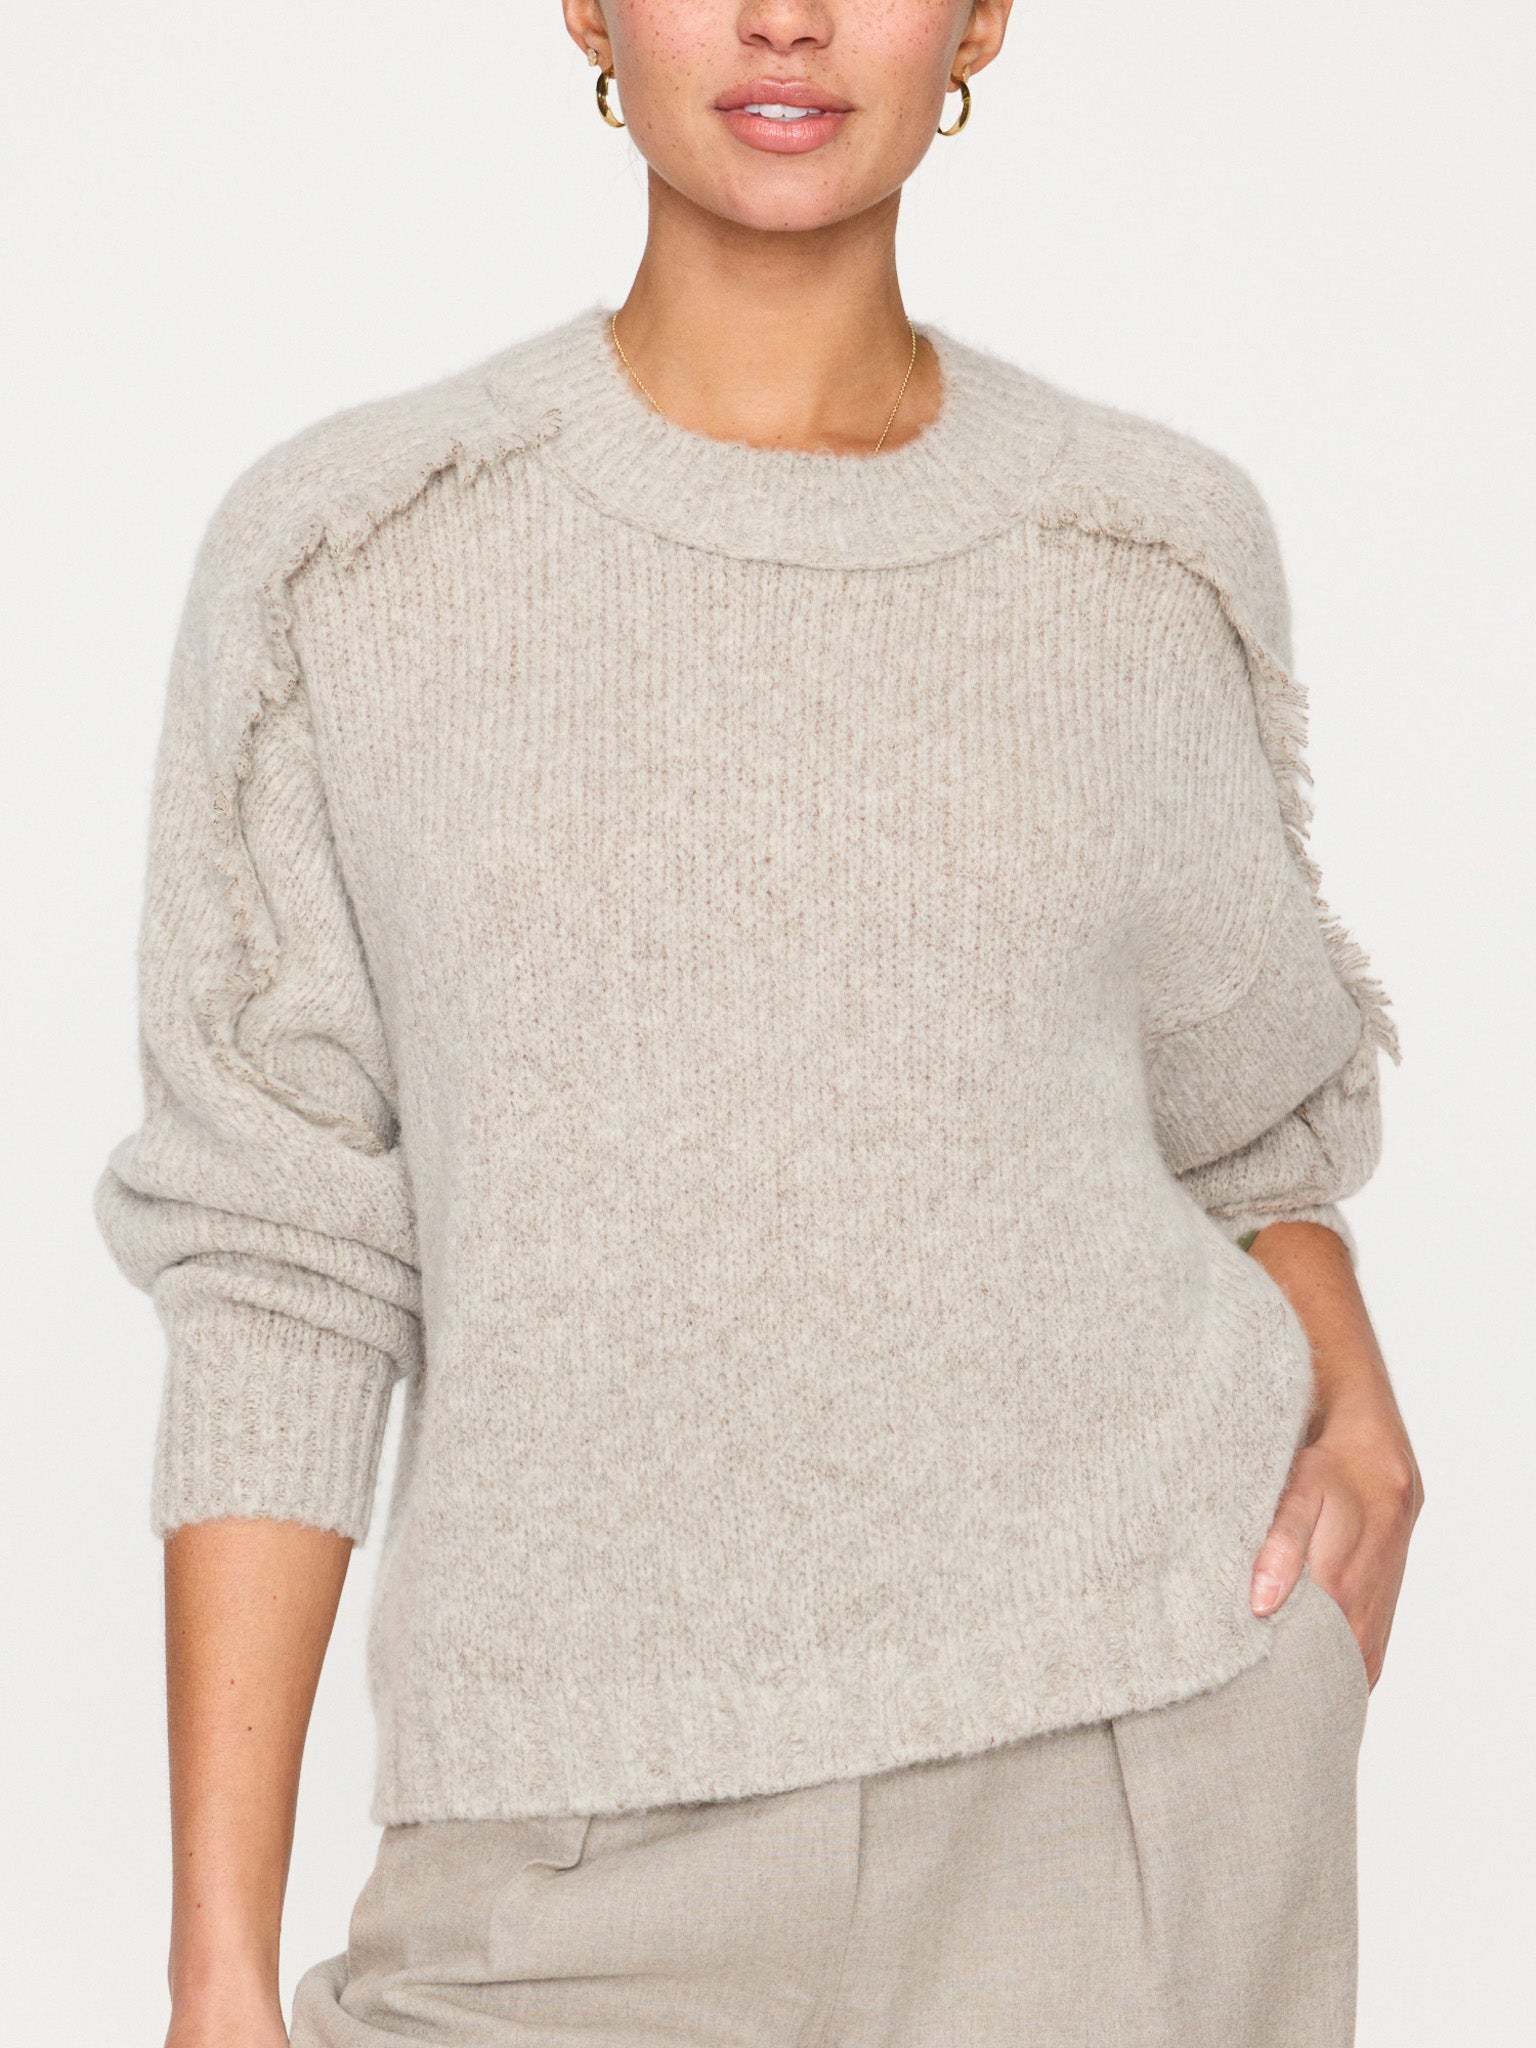 Aimee beige cashmere-wool crewneck sweater front view 3